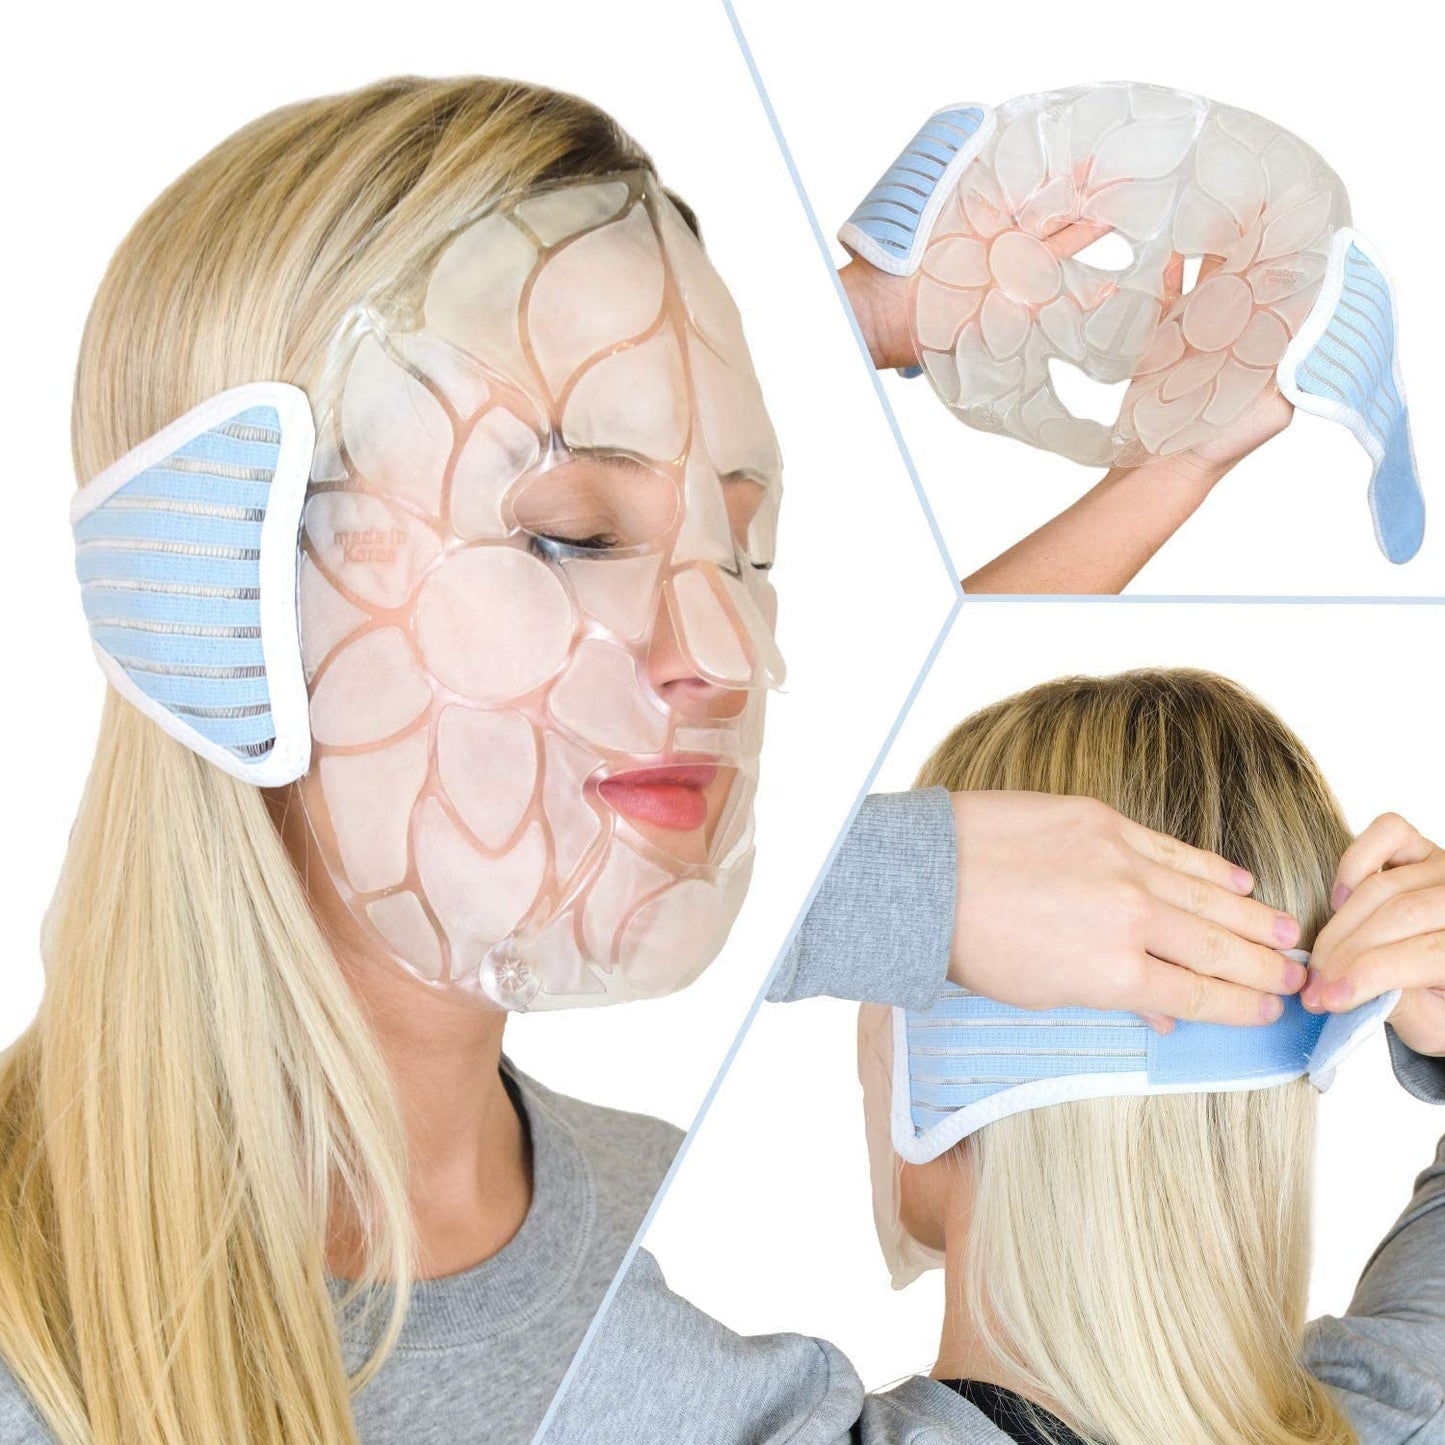 Face Ice Pack (Facial Mask) Contoured for a Comfortable Fit